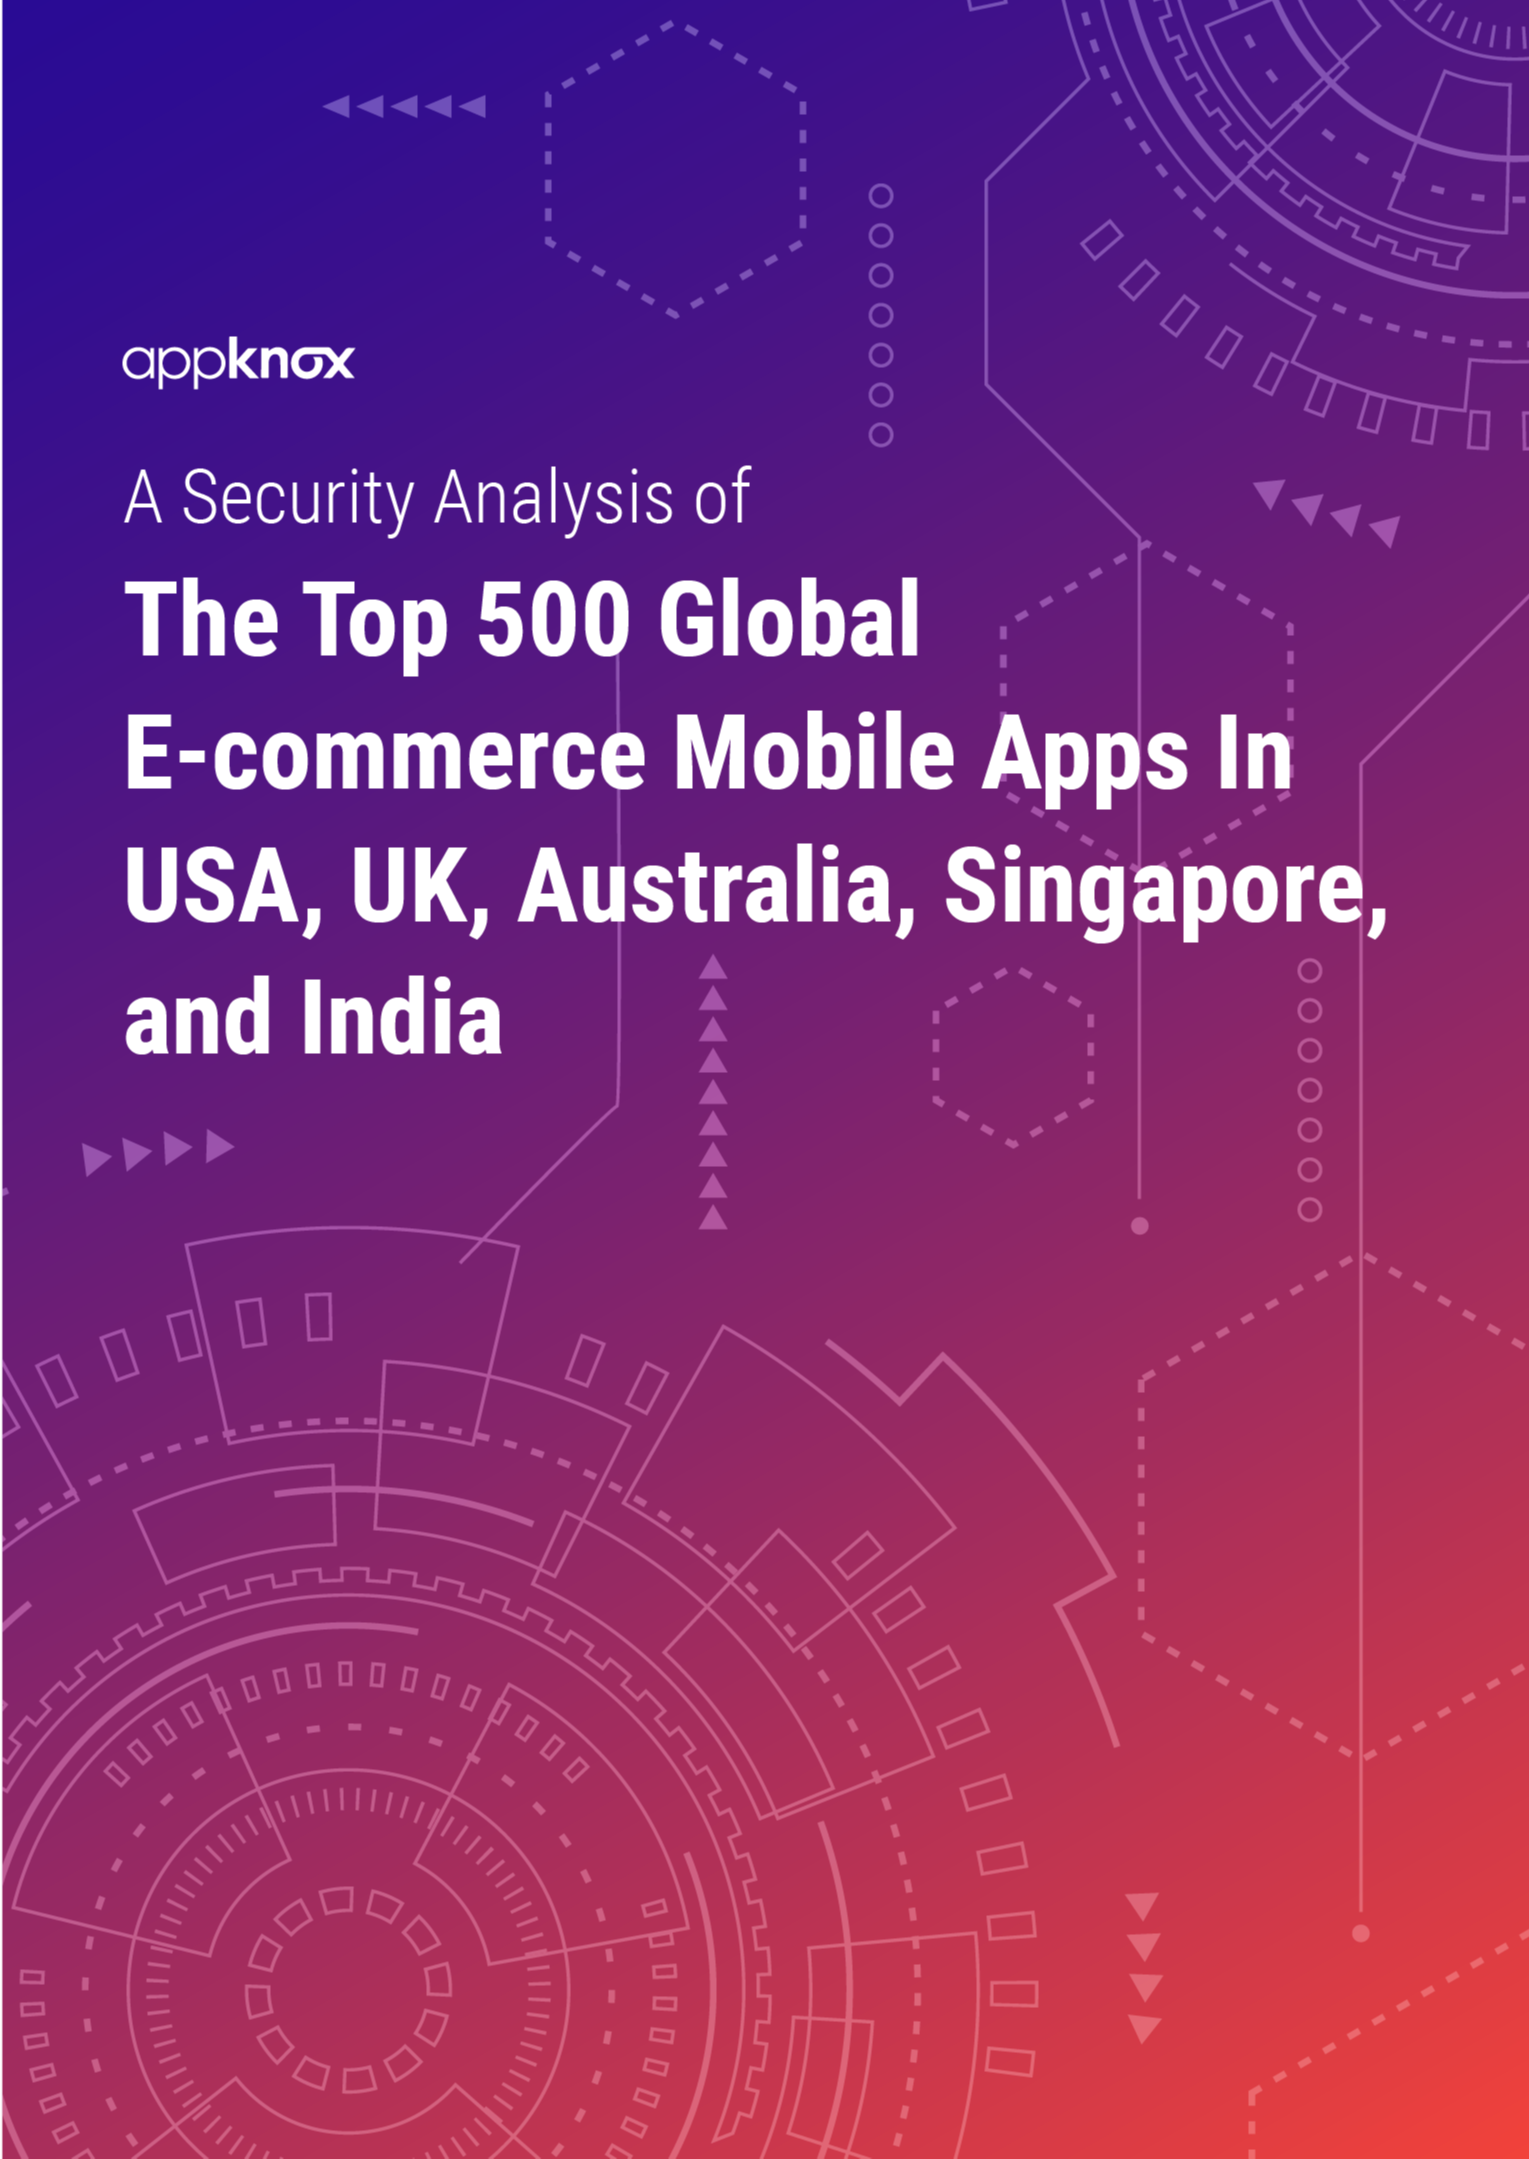 REPORTS - A Security Analysis of The Top 500 Global E-commerce Mobile Apps In USA, UK, Australia, Singapore, and India-1